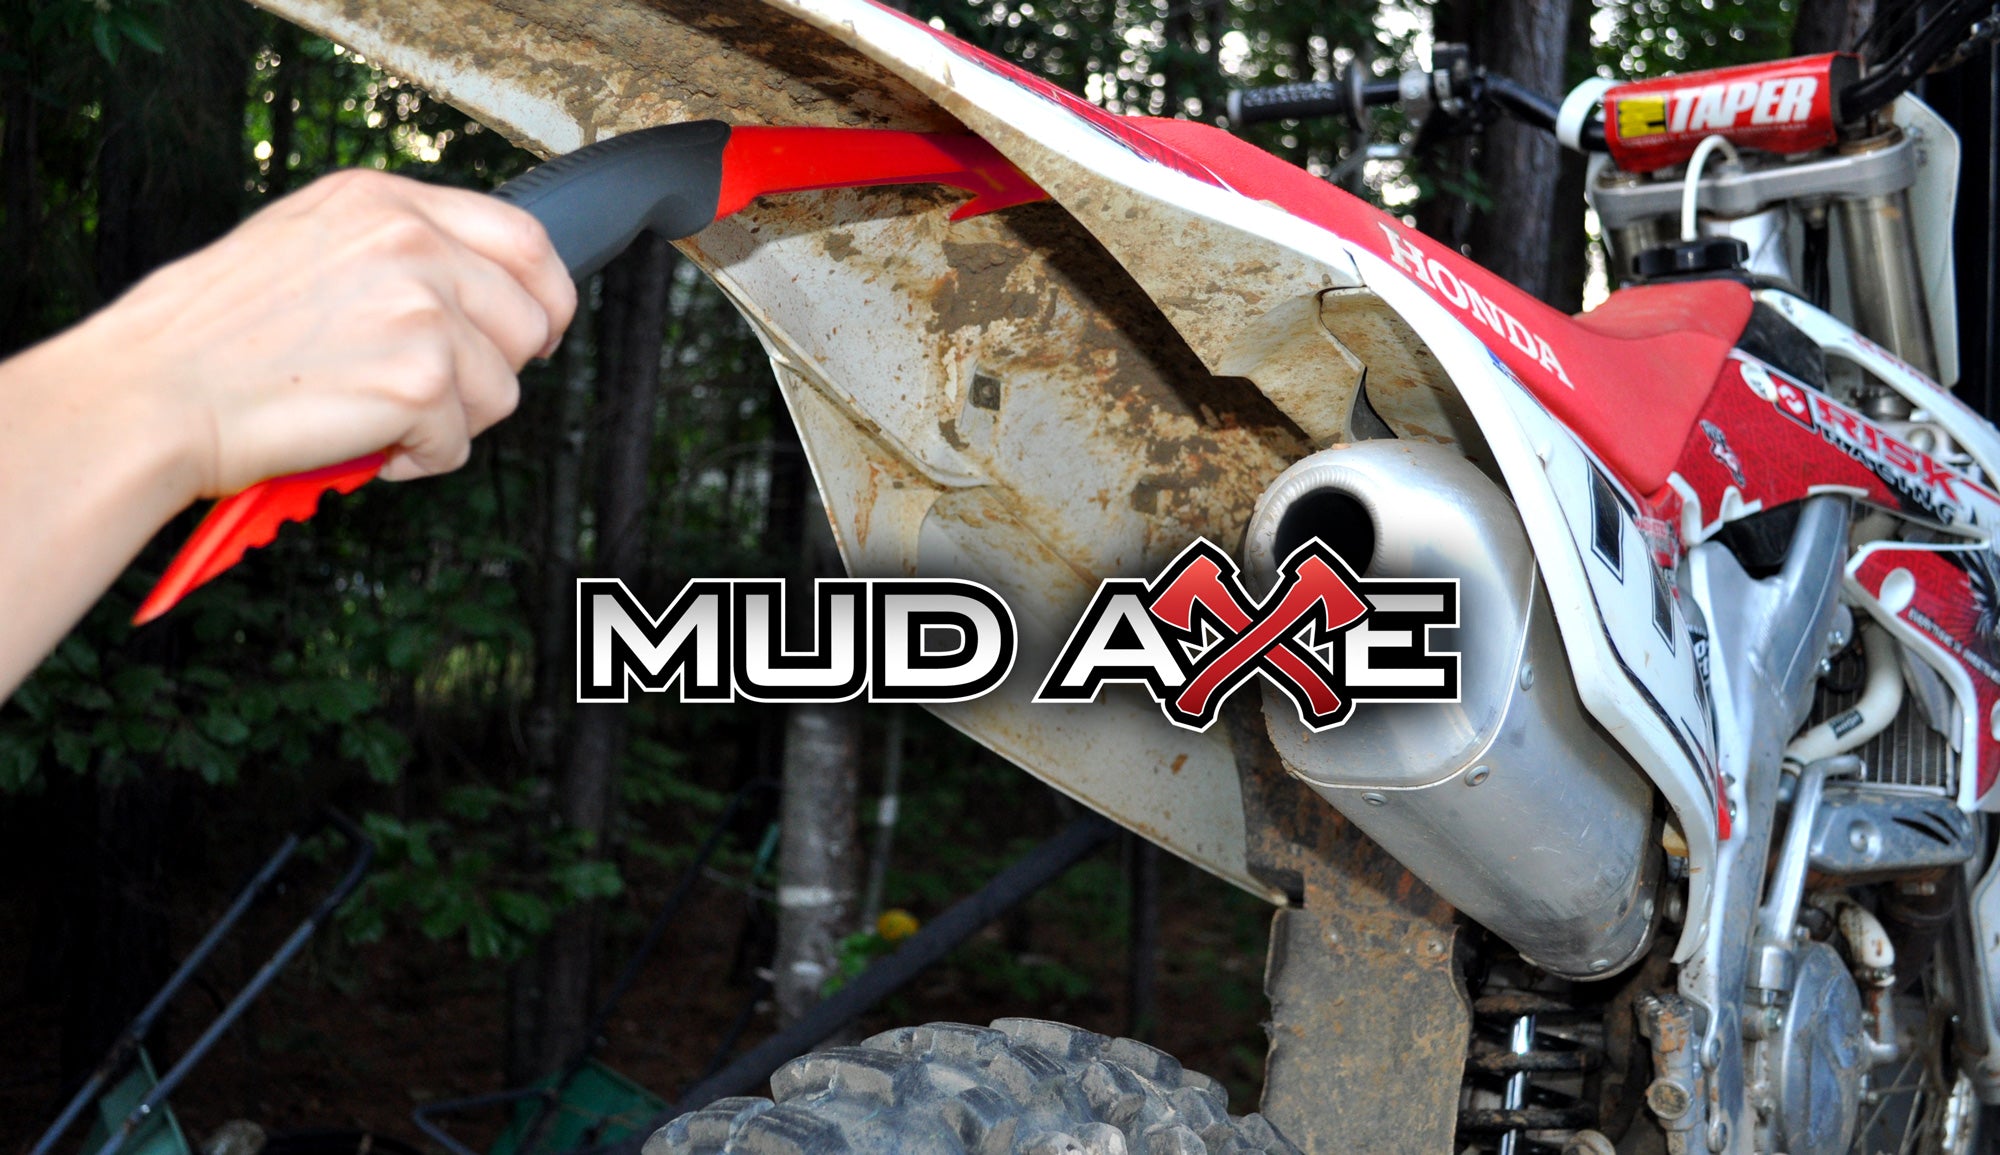 Mud Axe - A Serious Tool for Mud Removal from Motocross/Dirtbikes/ATVs/UTVs // Risk Racing Europe